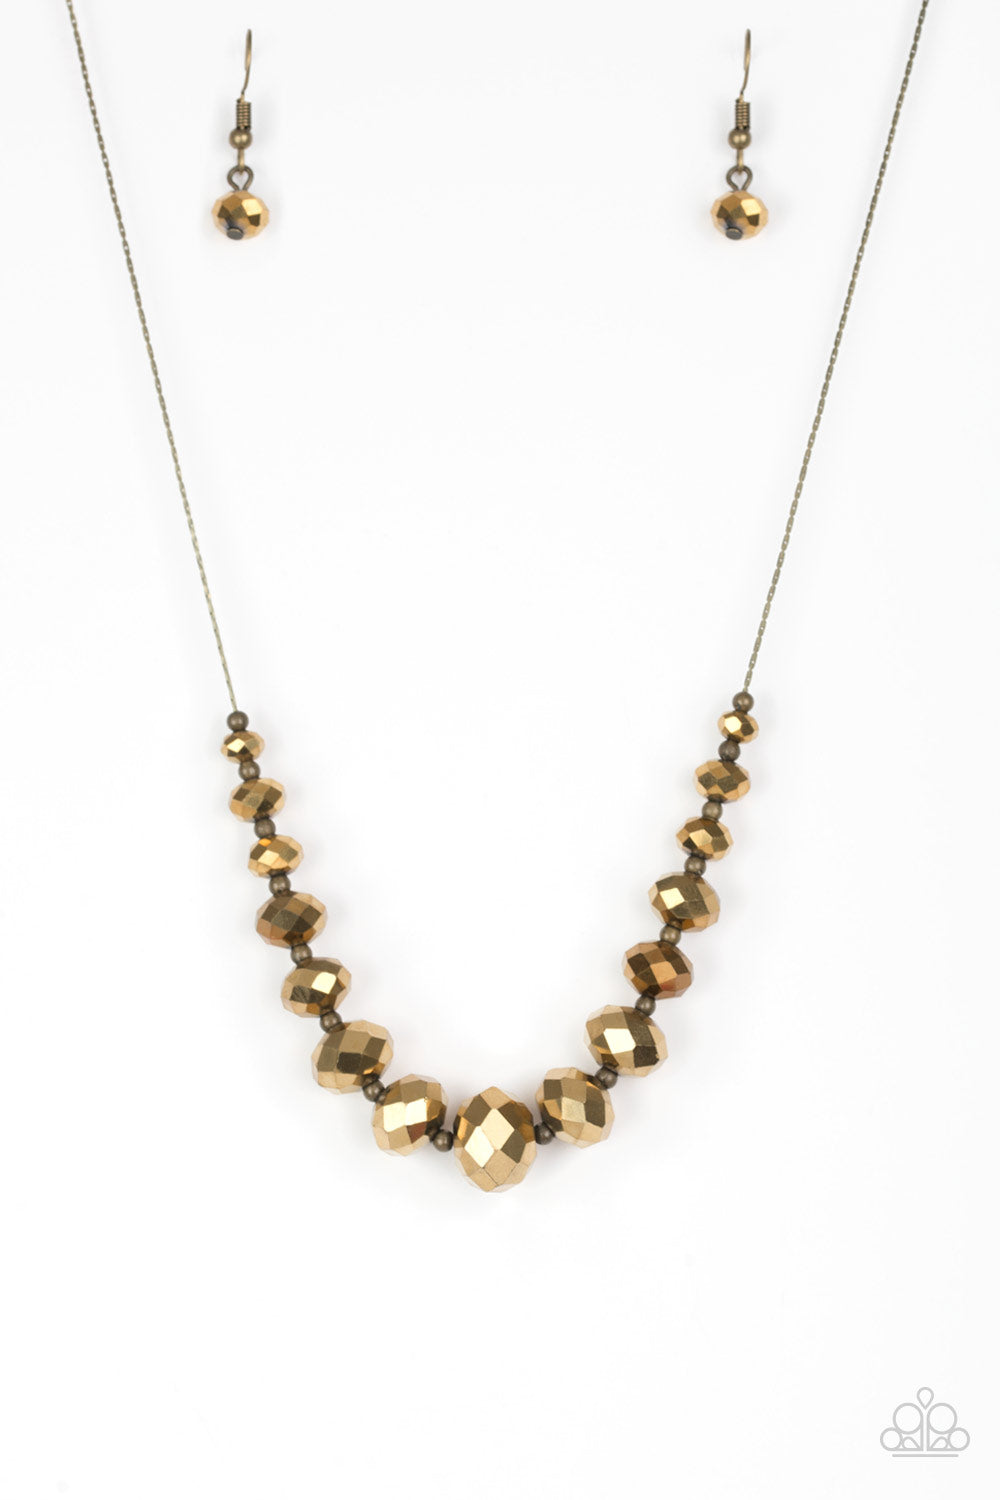 Paparazzi ♥ Crystal Carriages - Brass ♥ Necklace – LisaAbercrombie